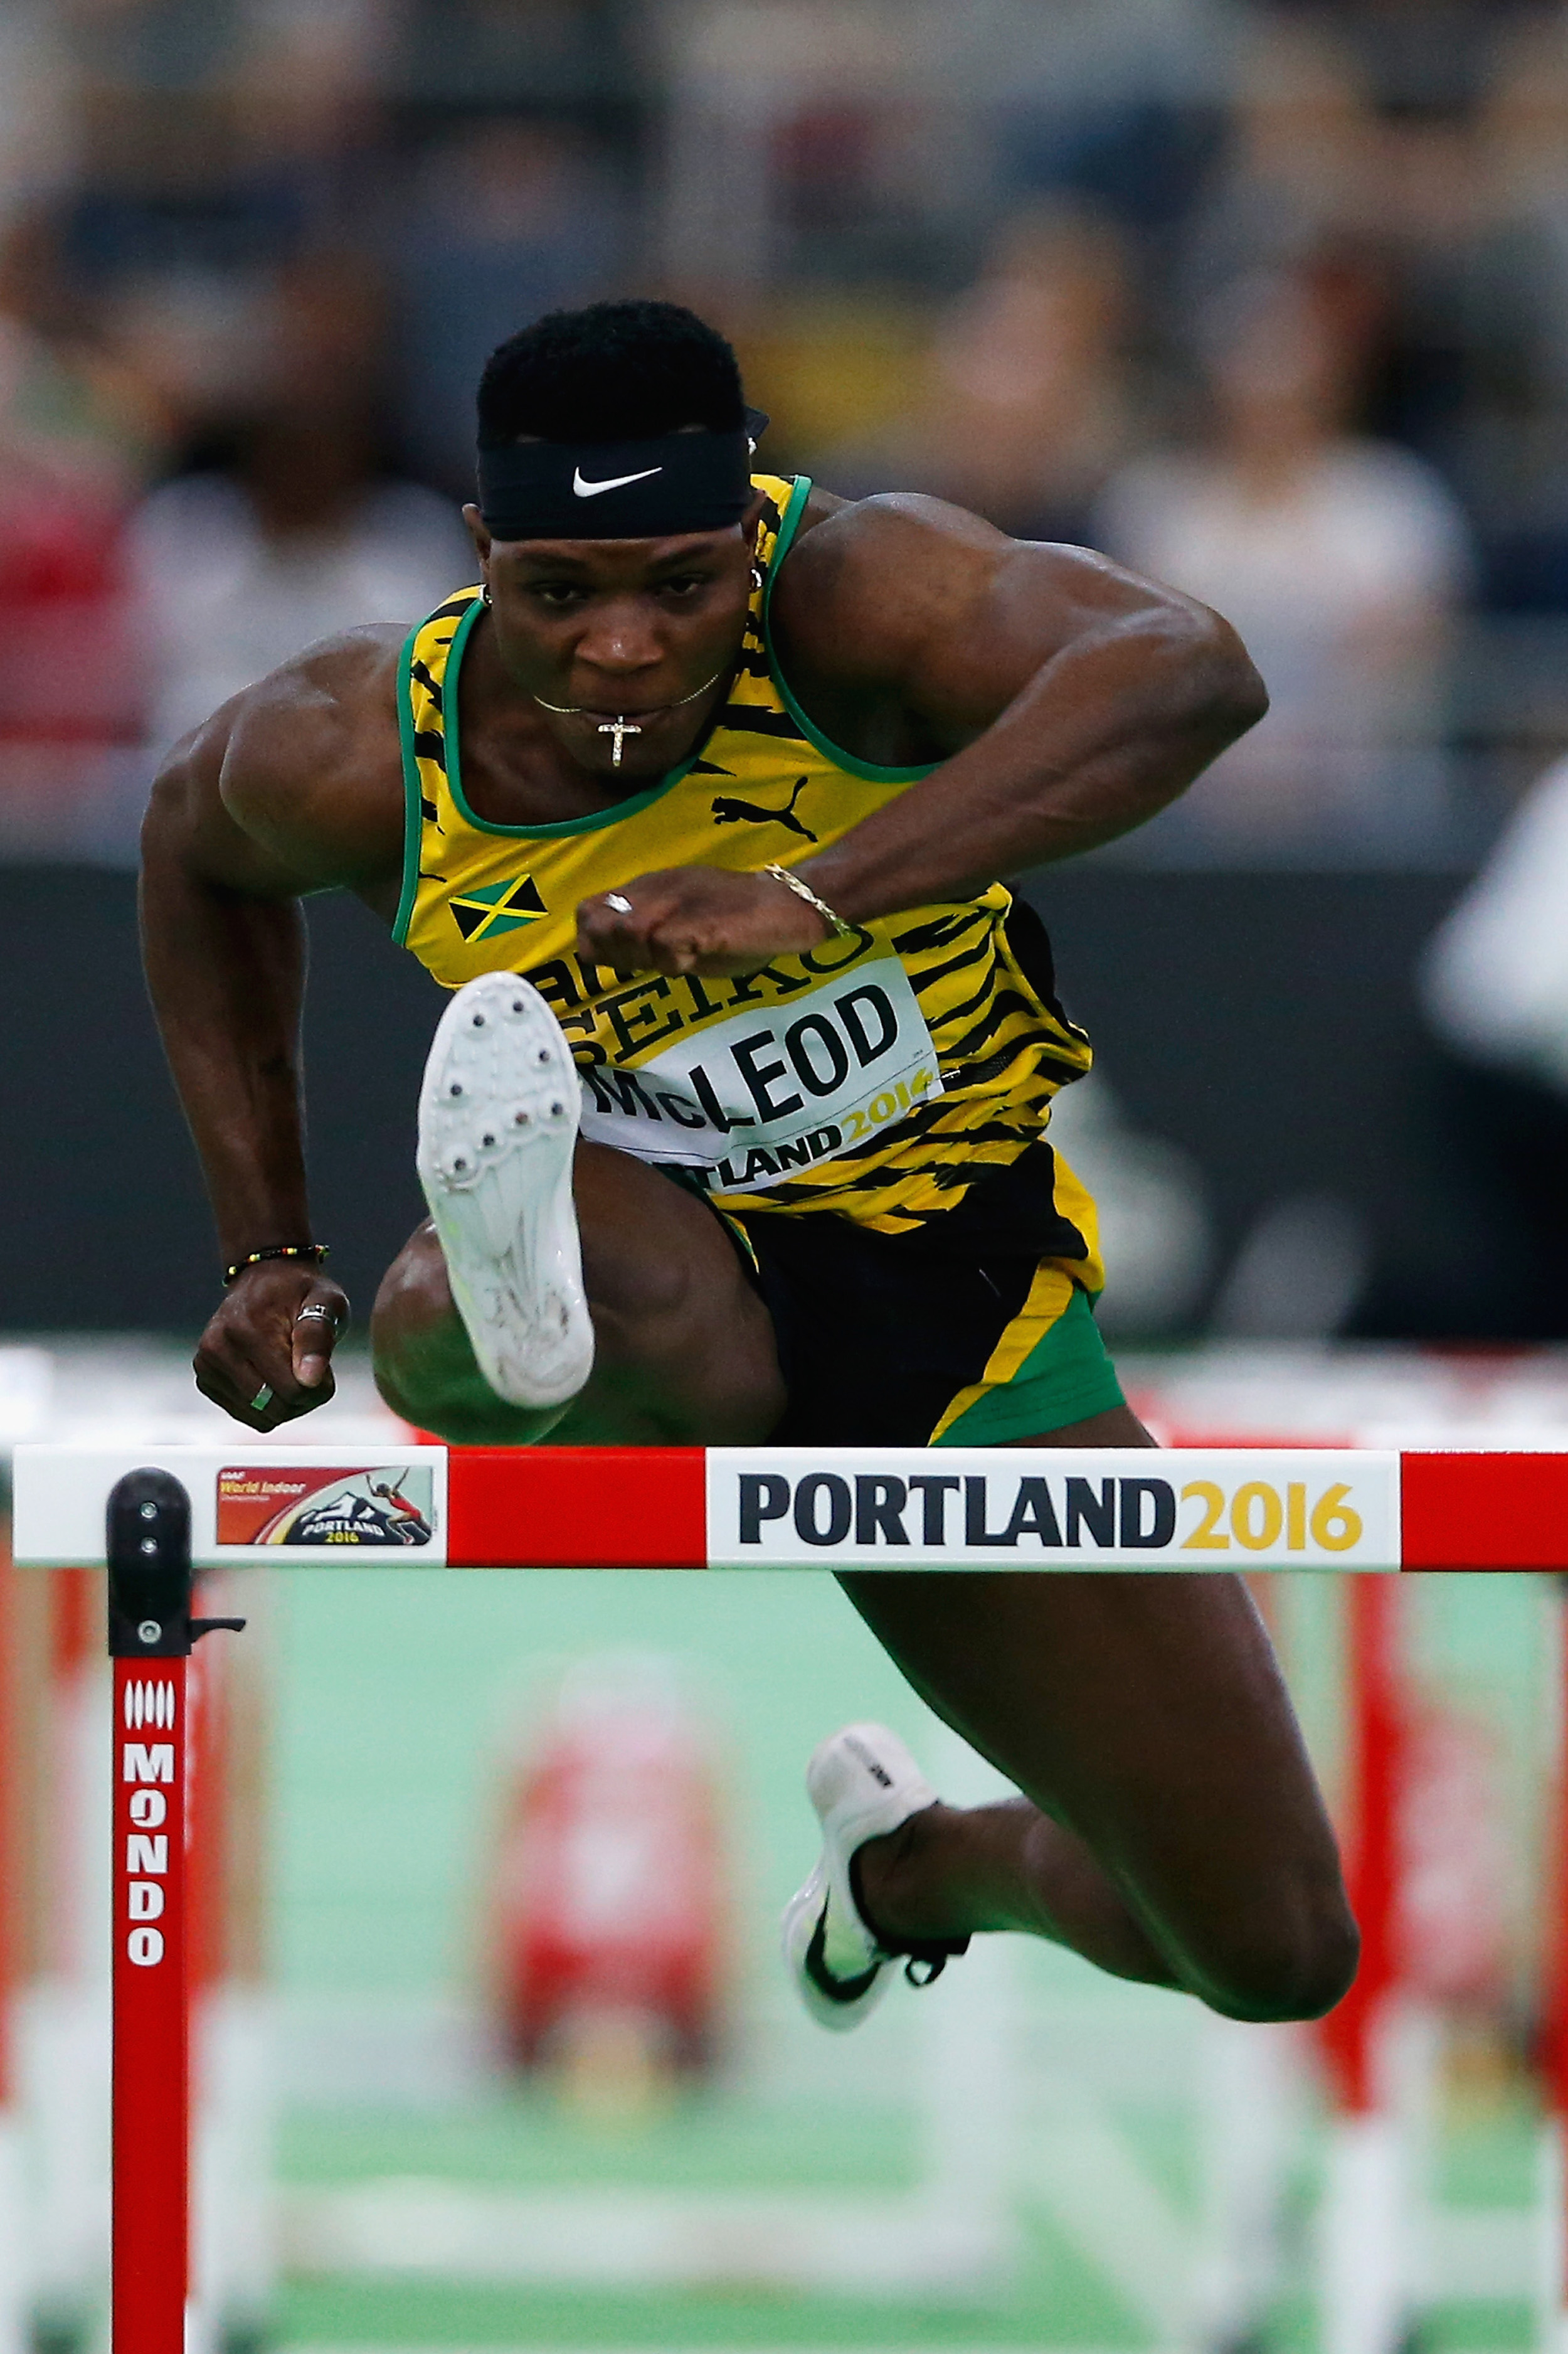 McLeod headlines strongest ever Prefontaine 110mH field